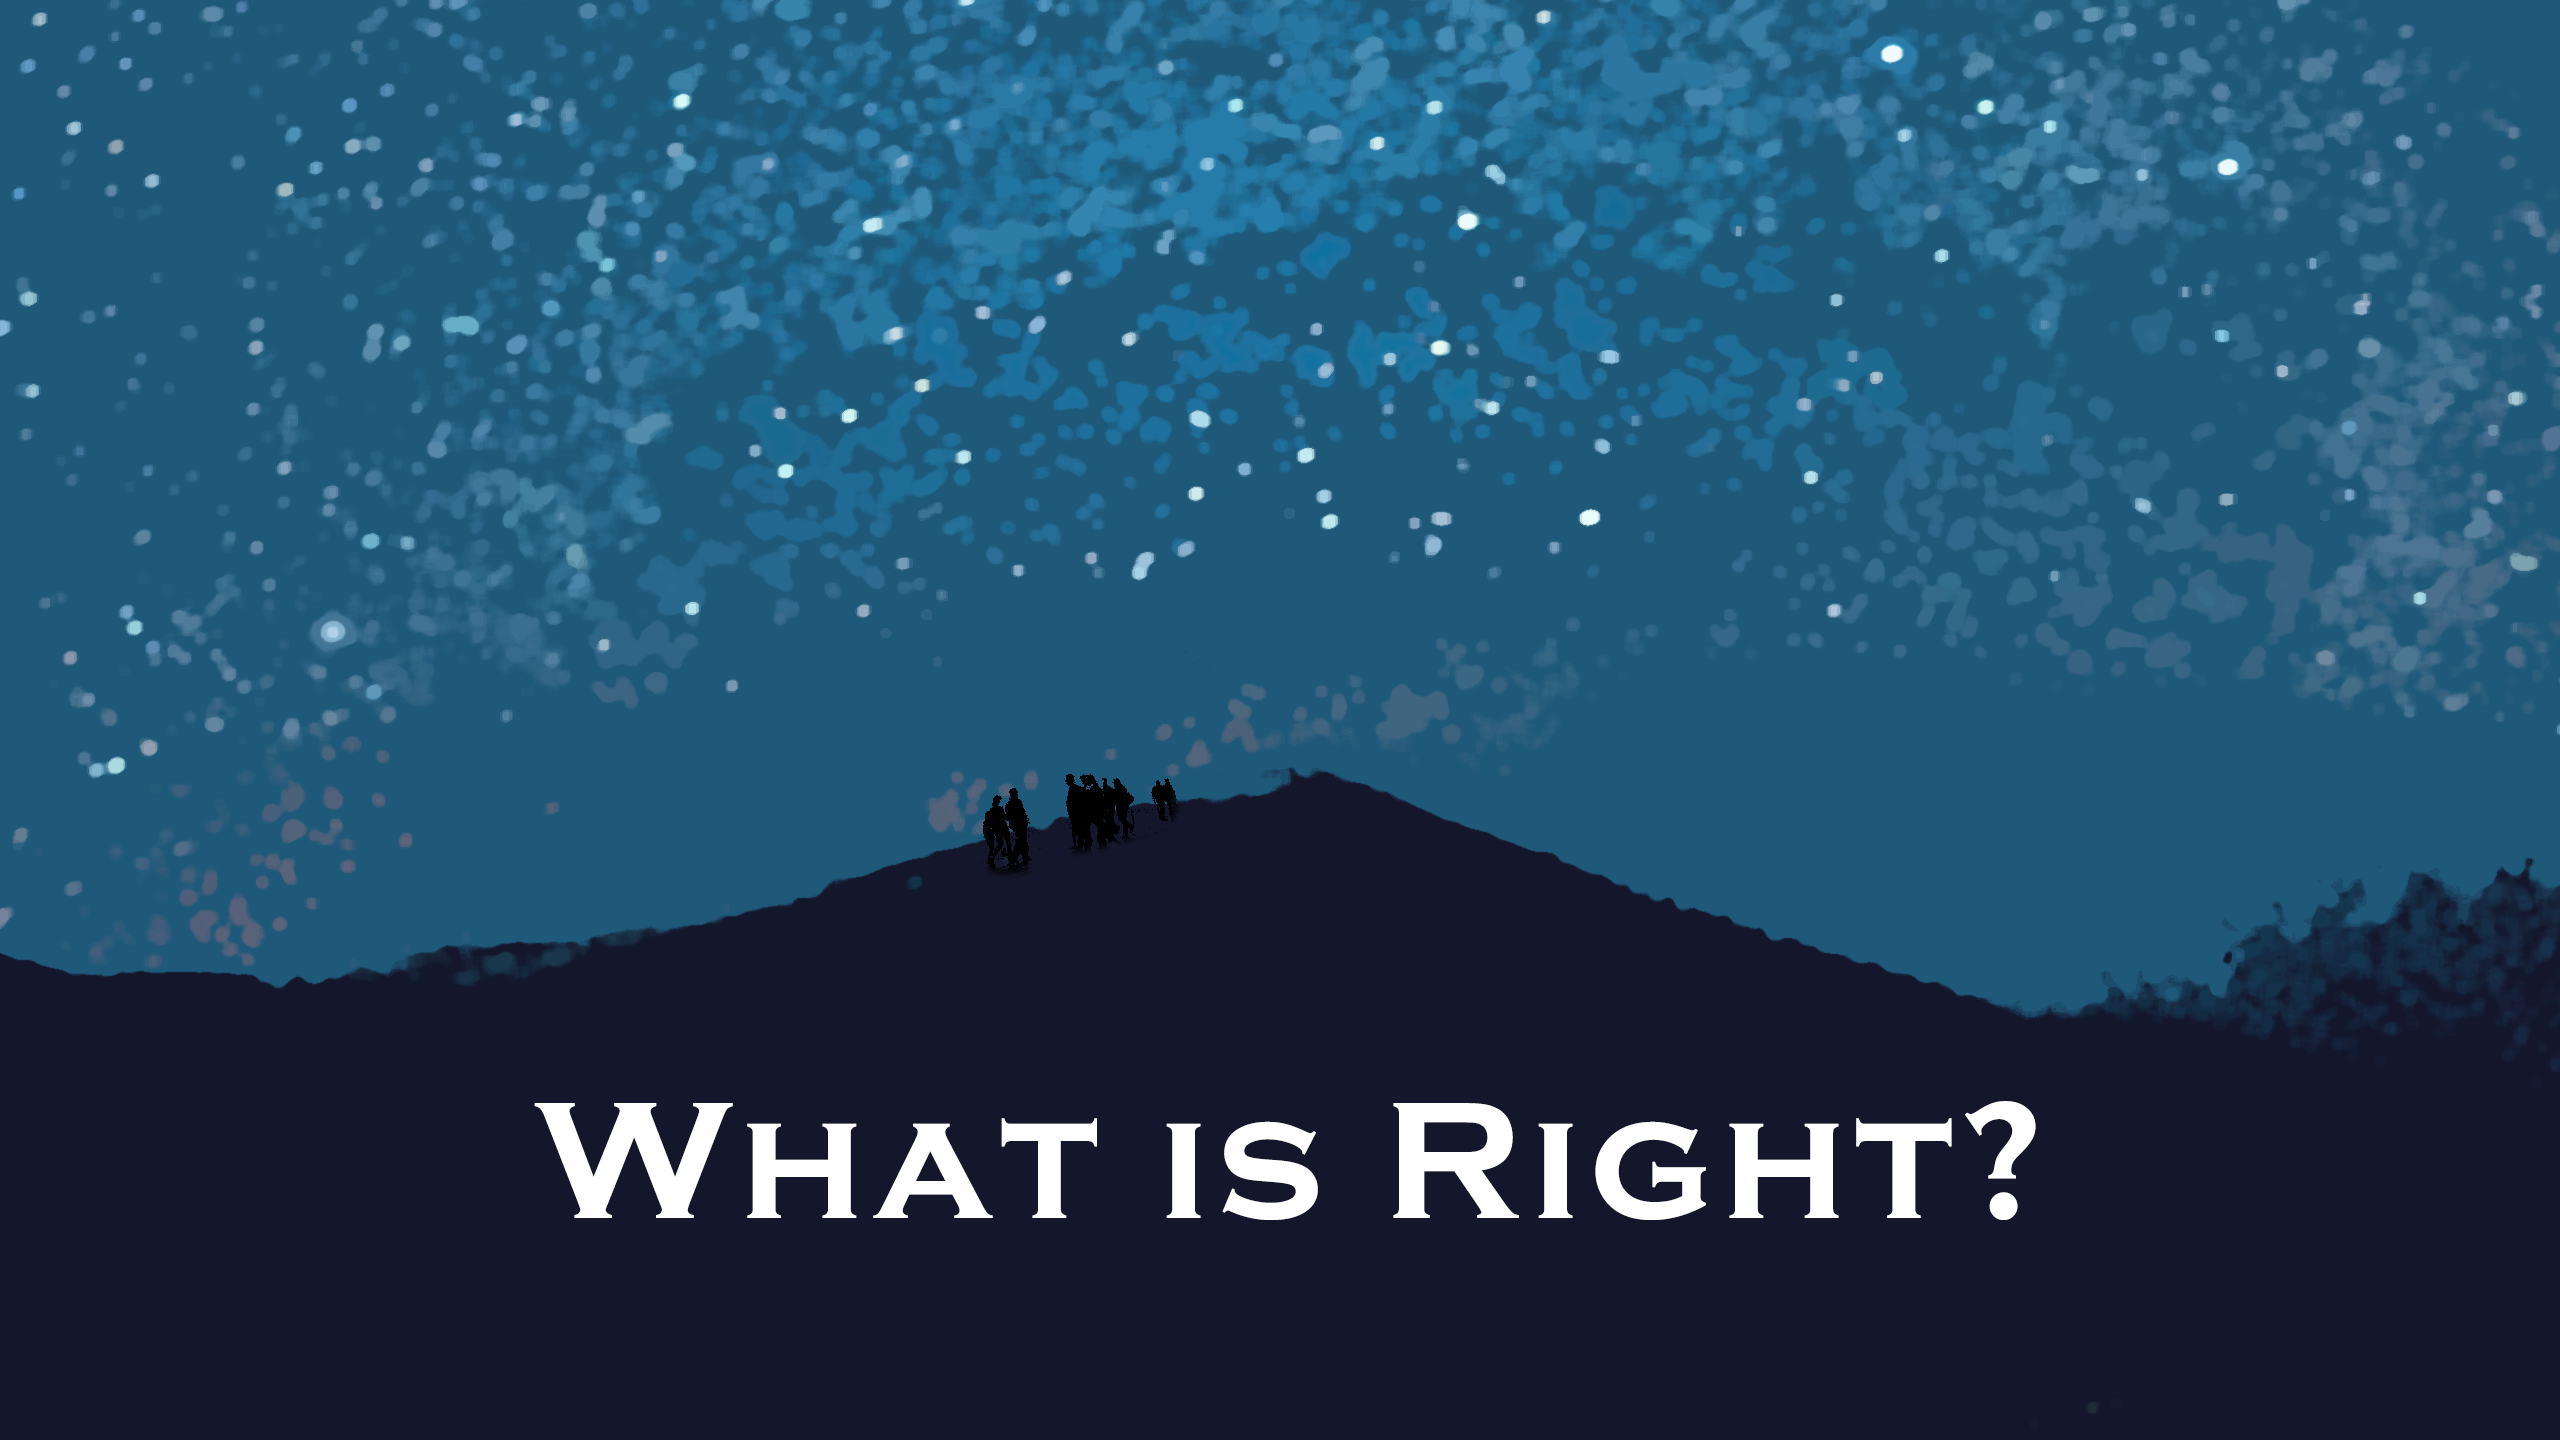 What is right?